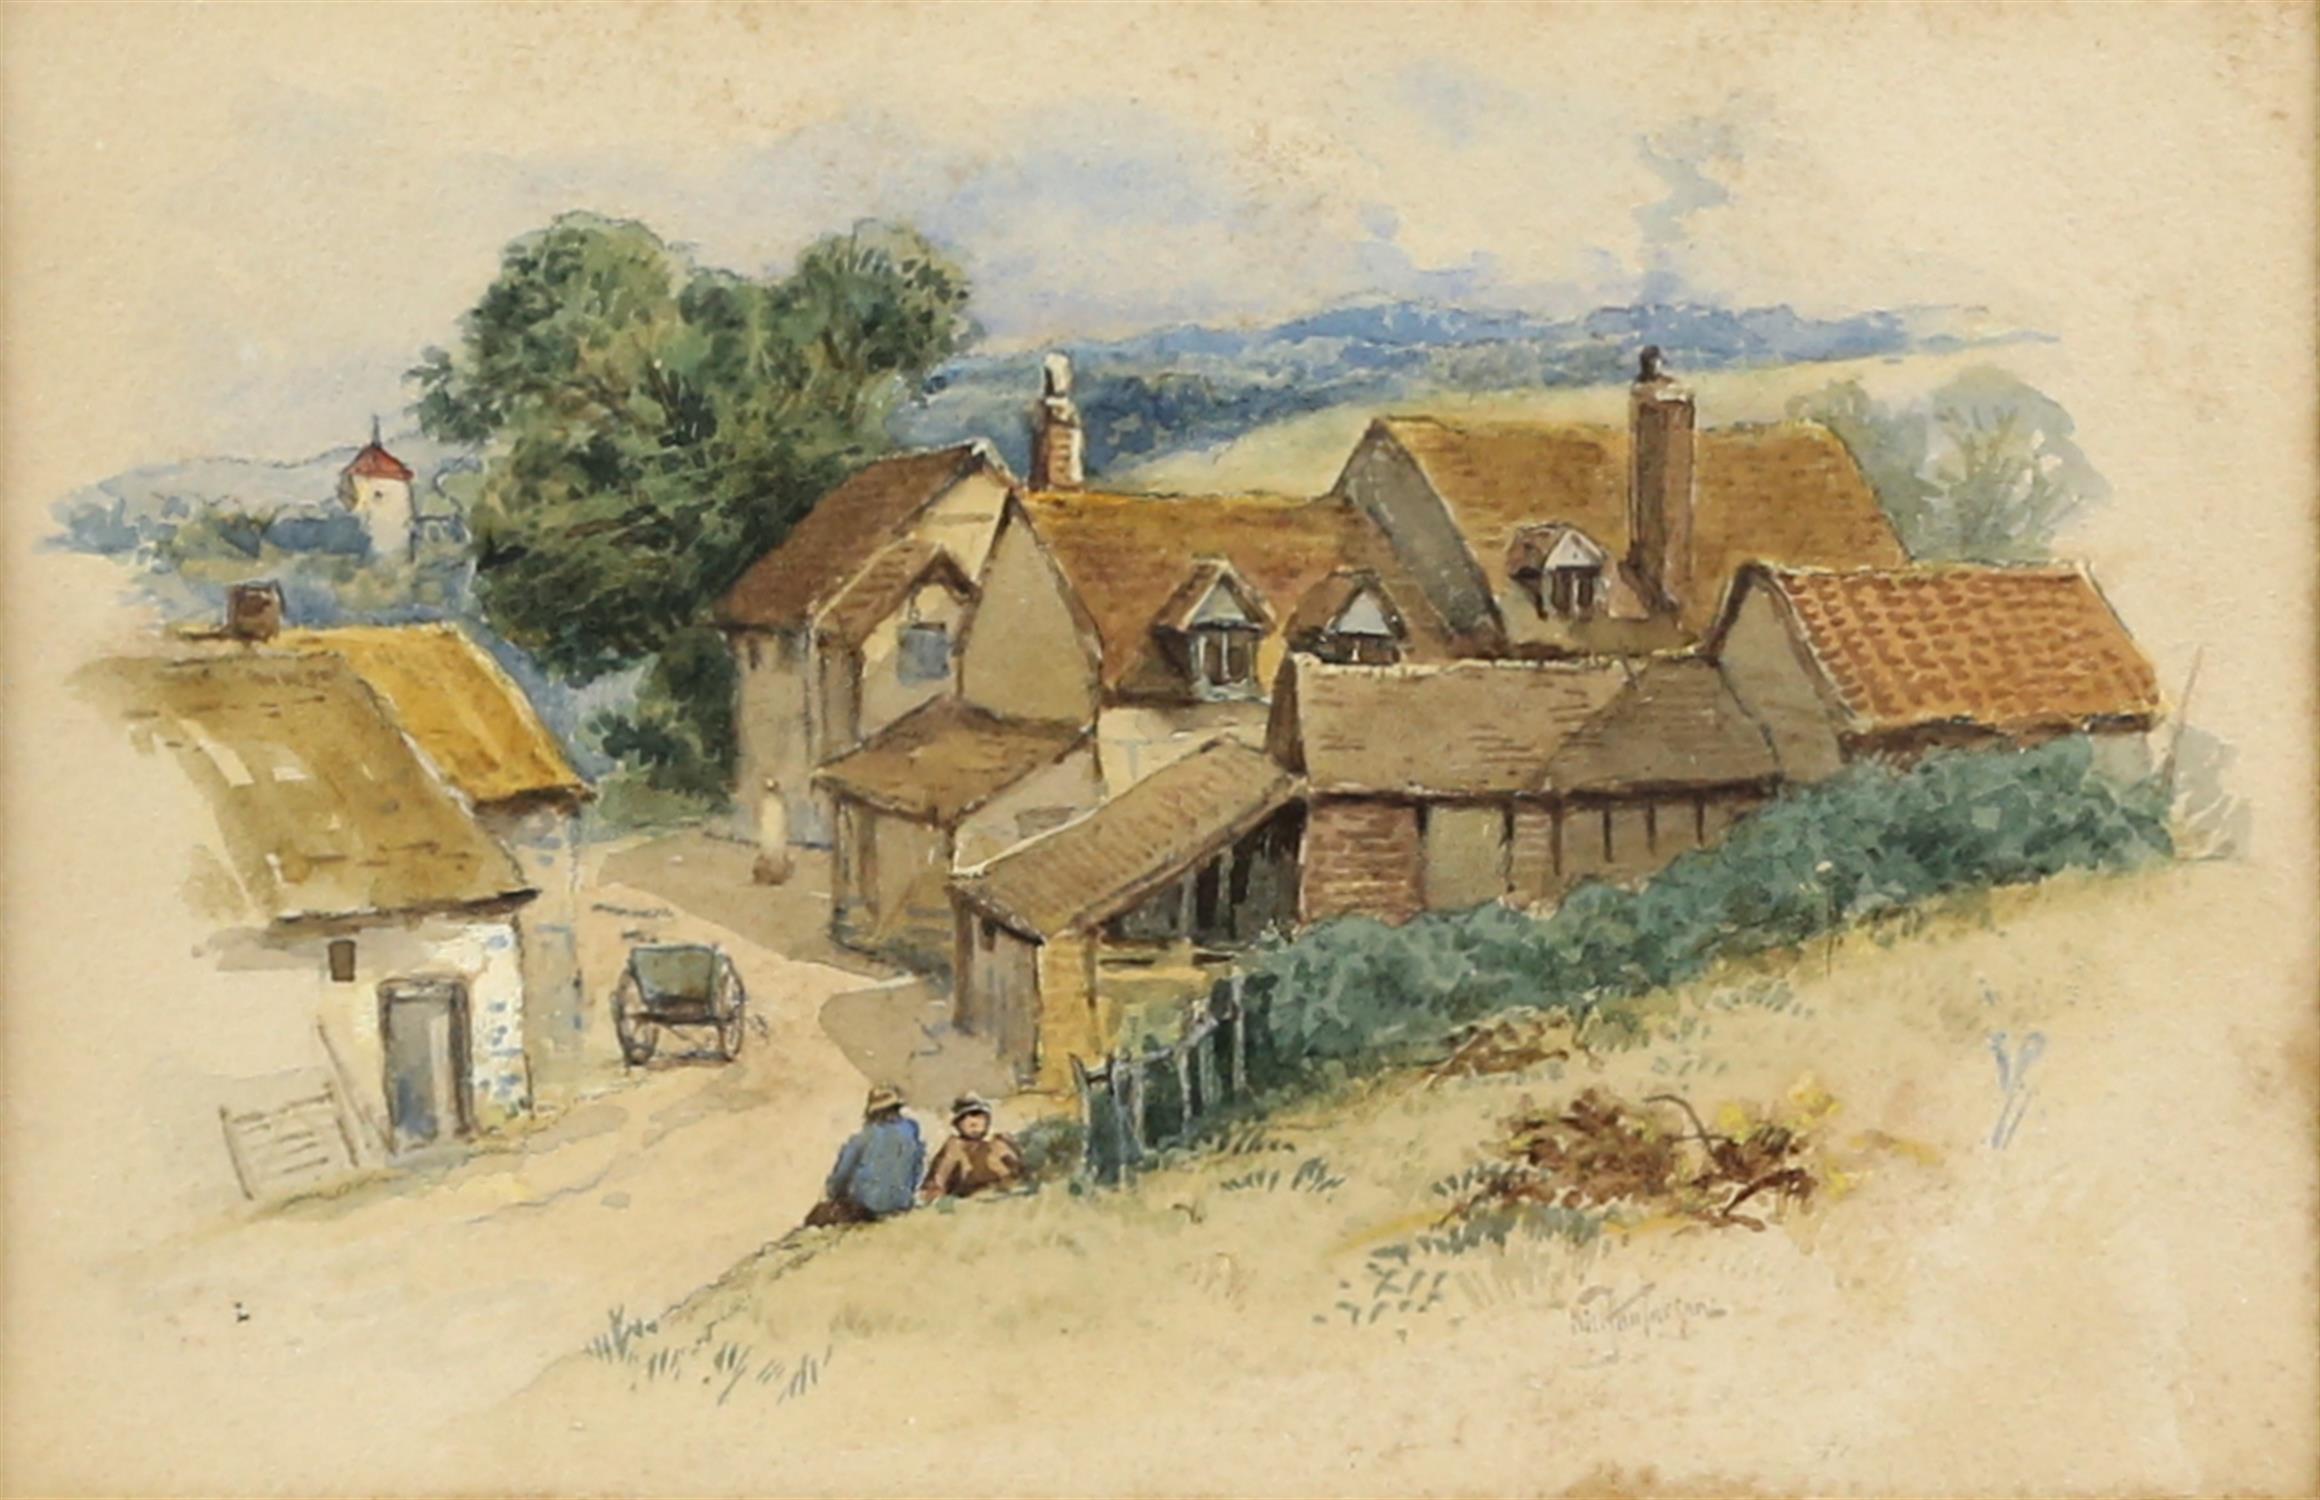 19th century, English School, village scene with figures, cart and cottages, indistinctly signed